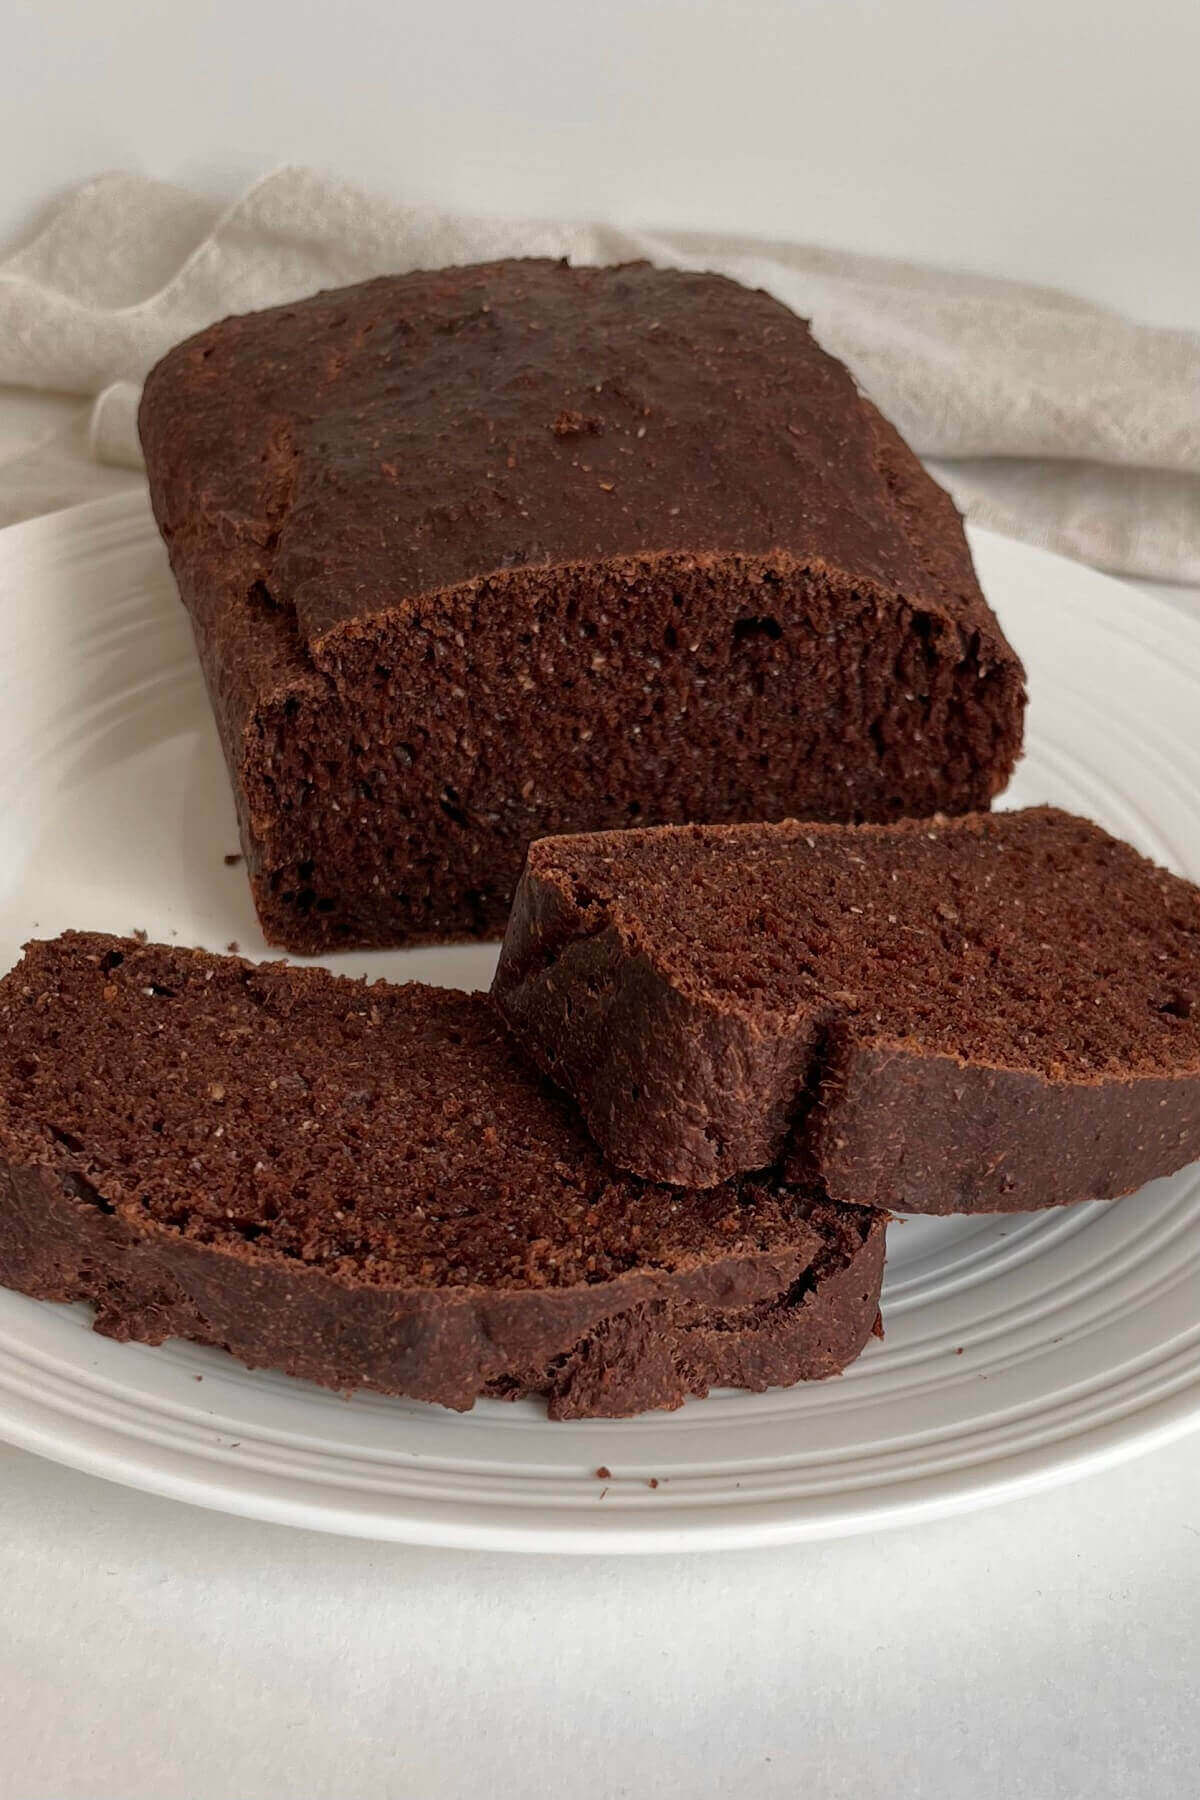 A loaf of brown bread with two slices cut on a white plate.